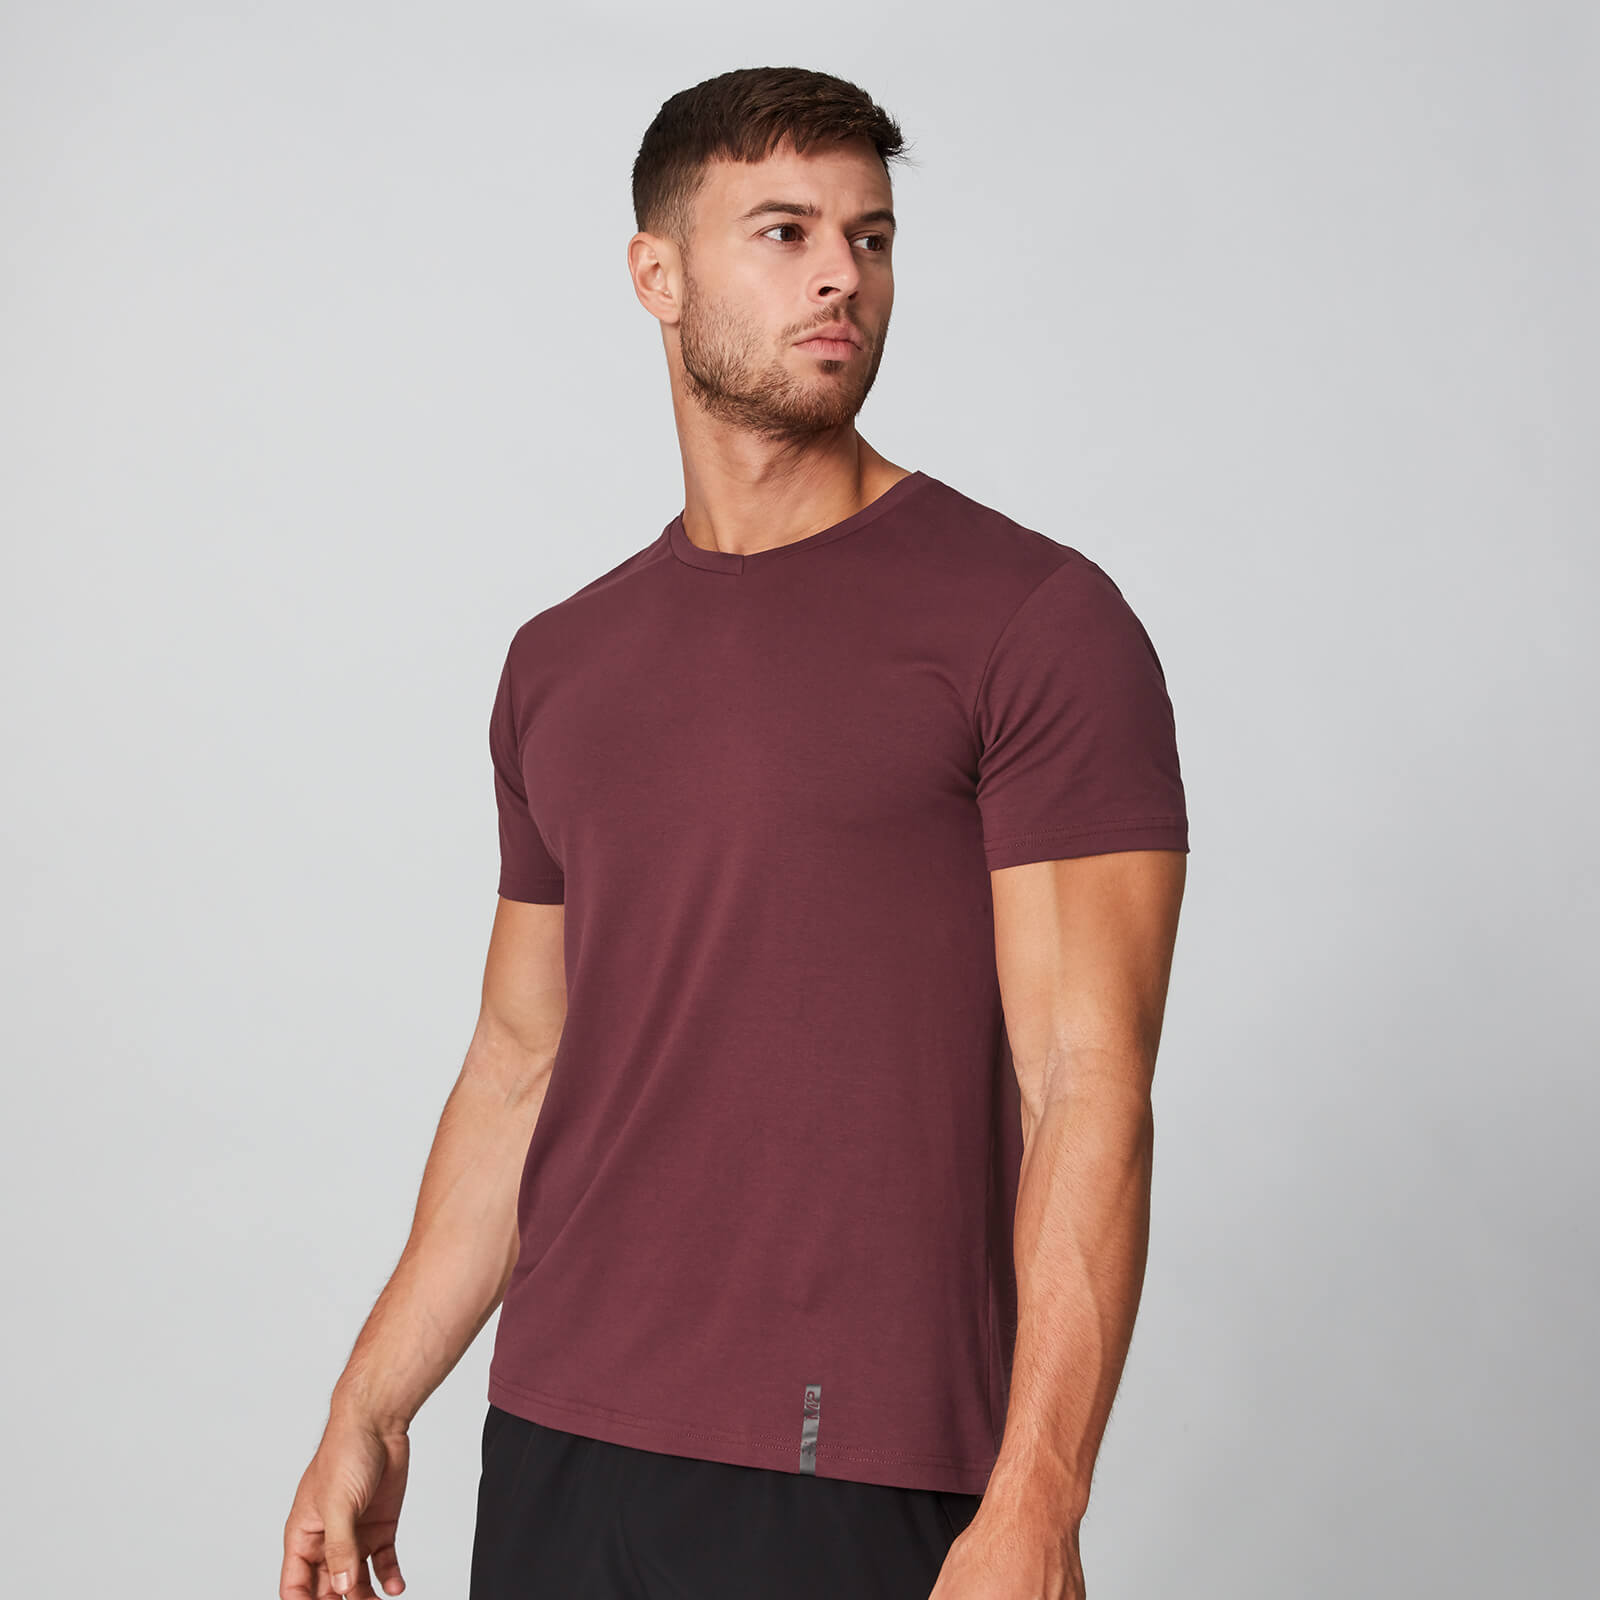 Myprotein Luxe Classic V-Neck - Oxblood - XS